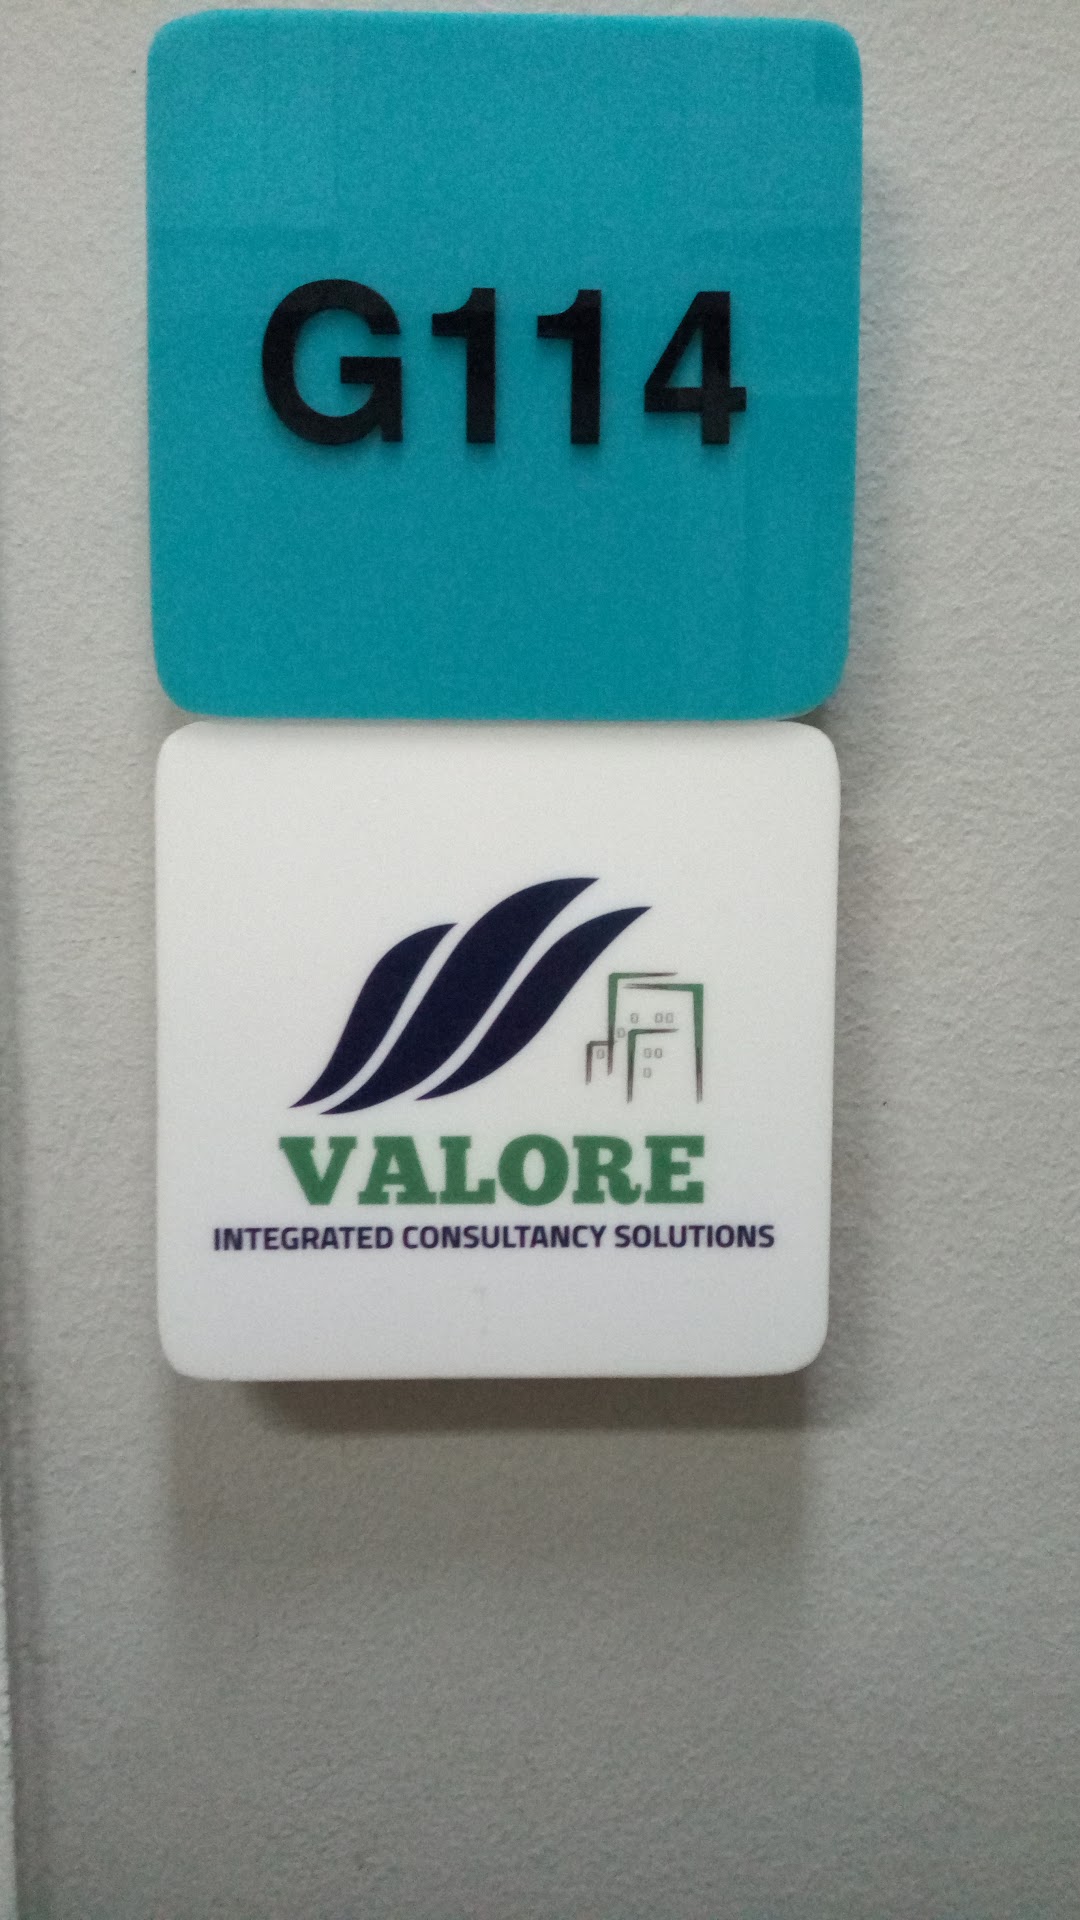 Valore Integrated Consultancy Solutions